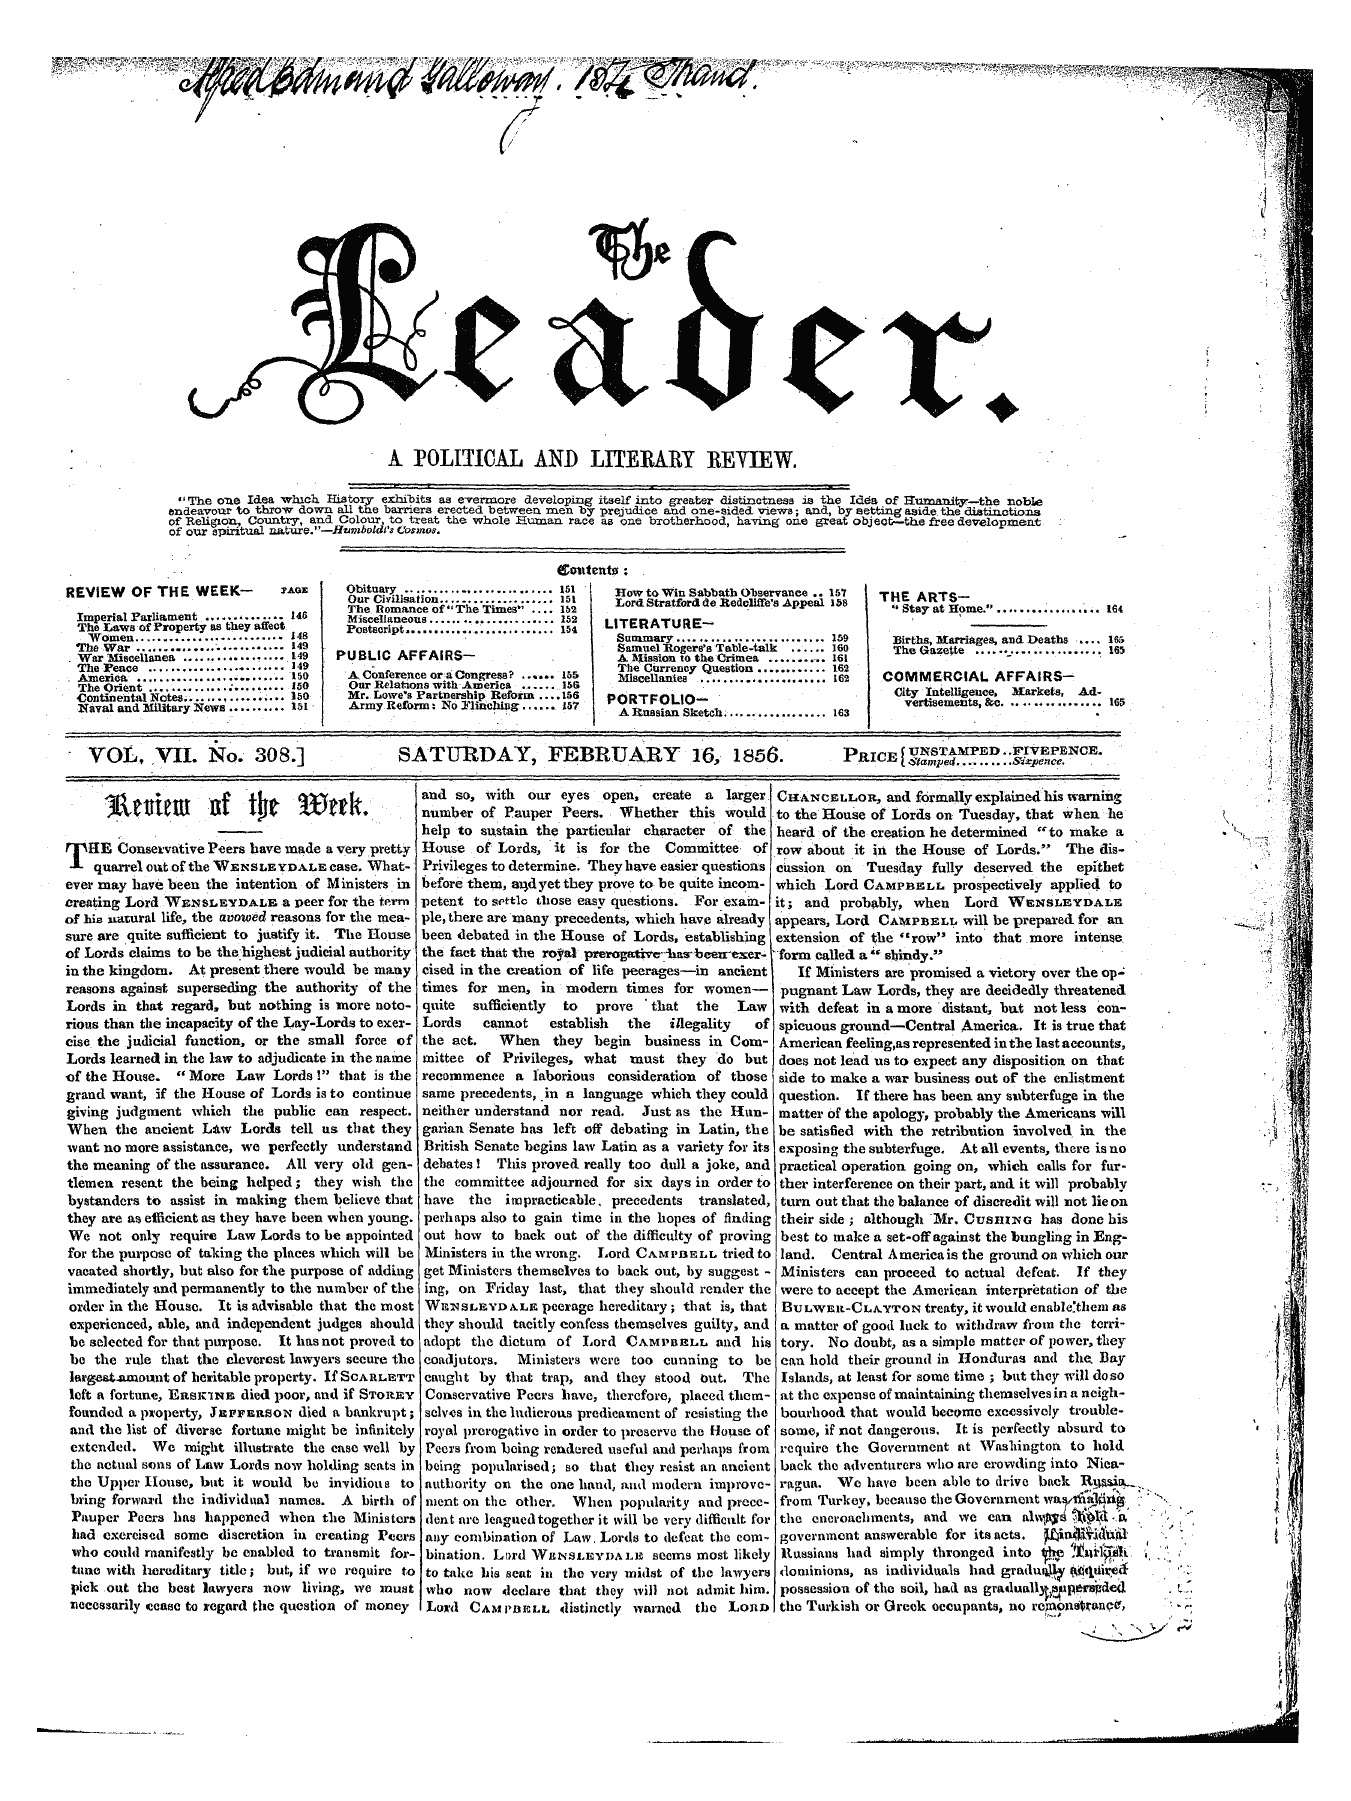 Leader (1850-1860): jS F Y, 1st edition - (F O / ~^3 V'-V Viv\ \ + A Political And Liteeart Eeyiew, Which